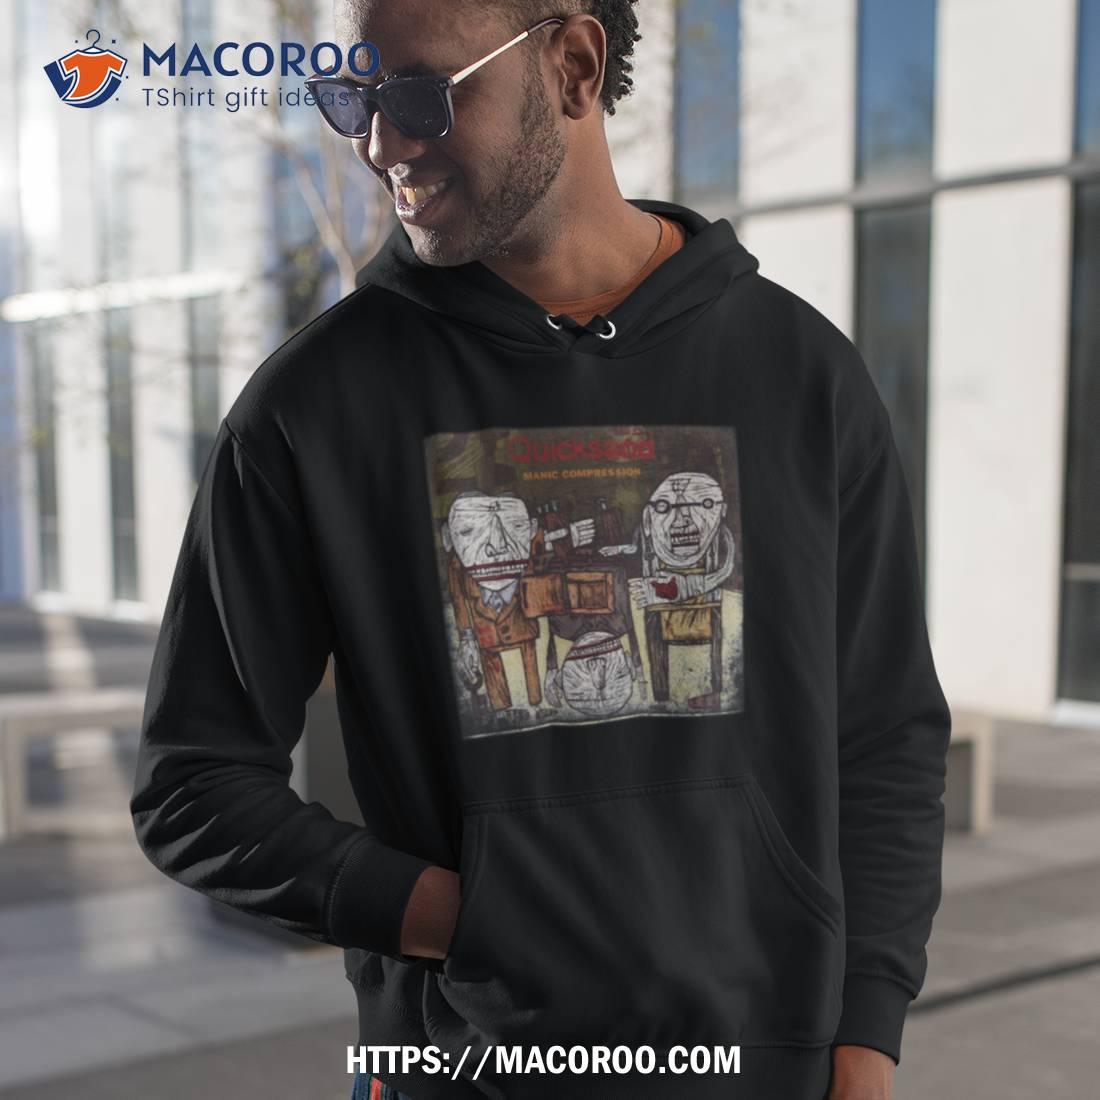 https://images.macoroo.com/wp-content/uploads/2023/10/quicksand-manic-compression-pullover-shirt-hoodie-1.jpg